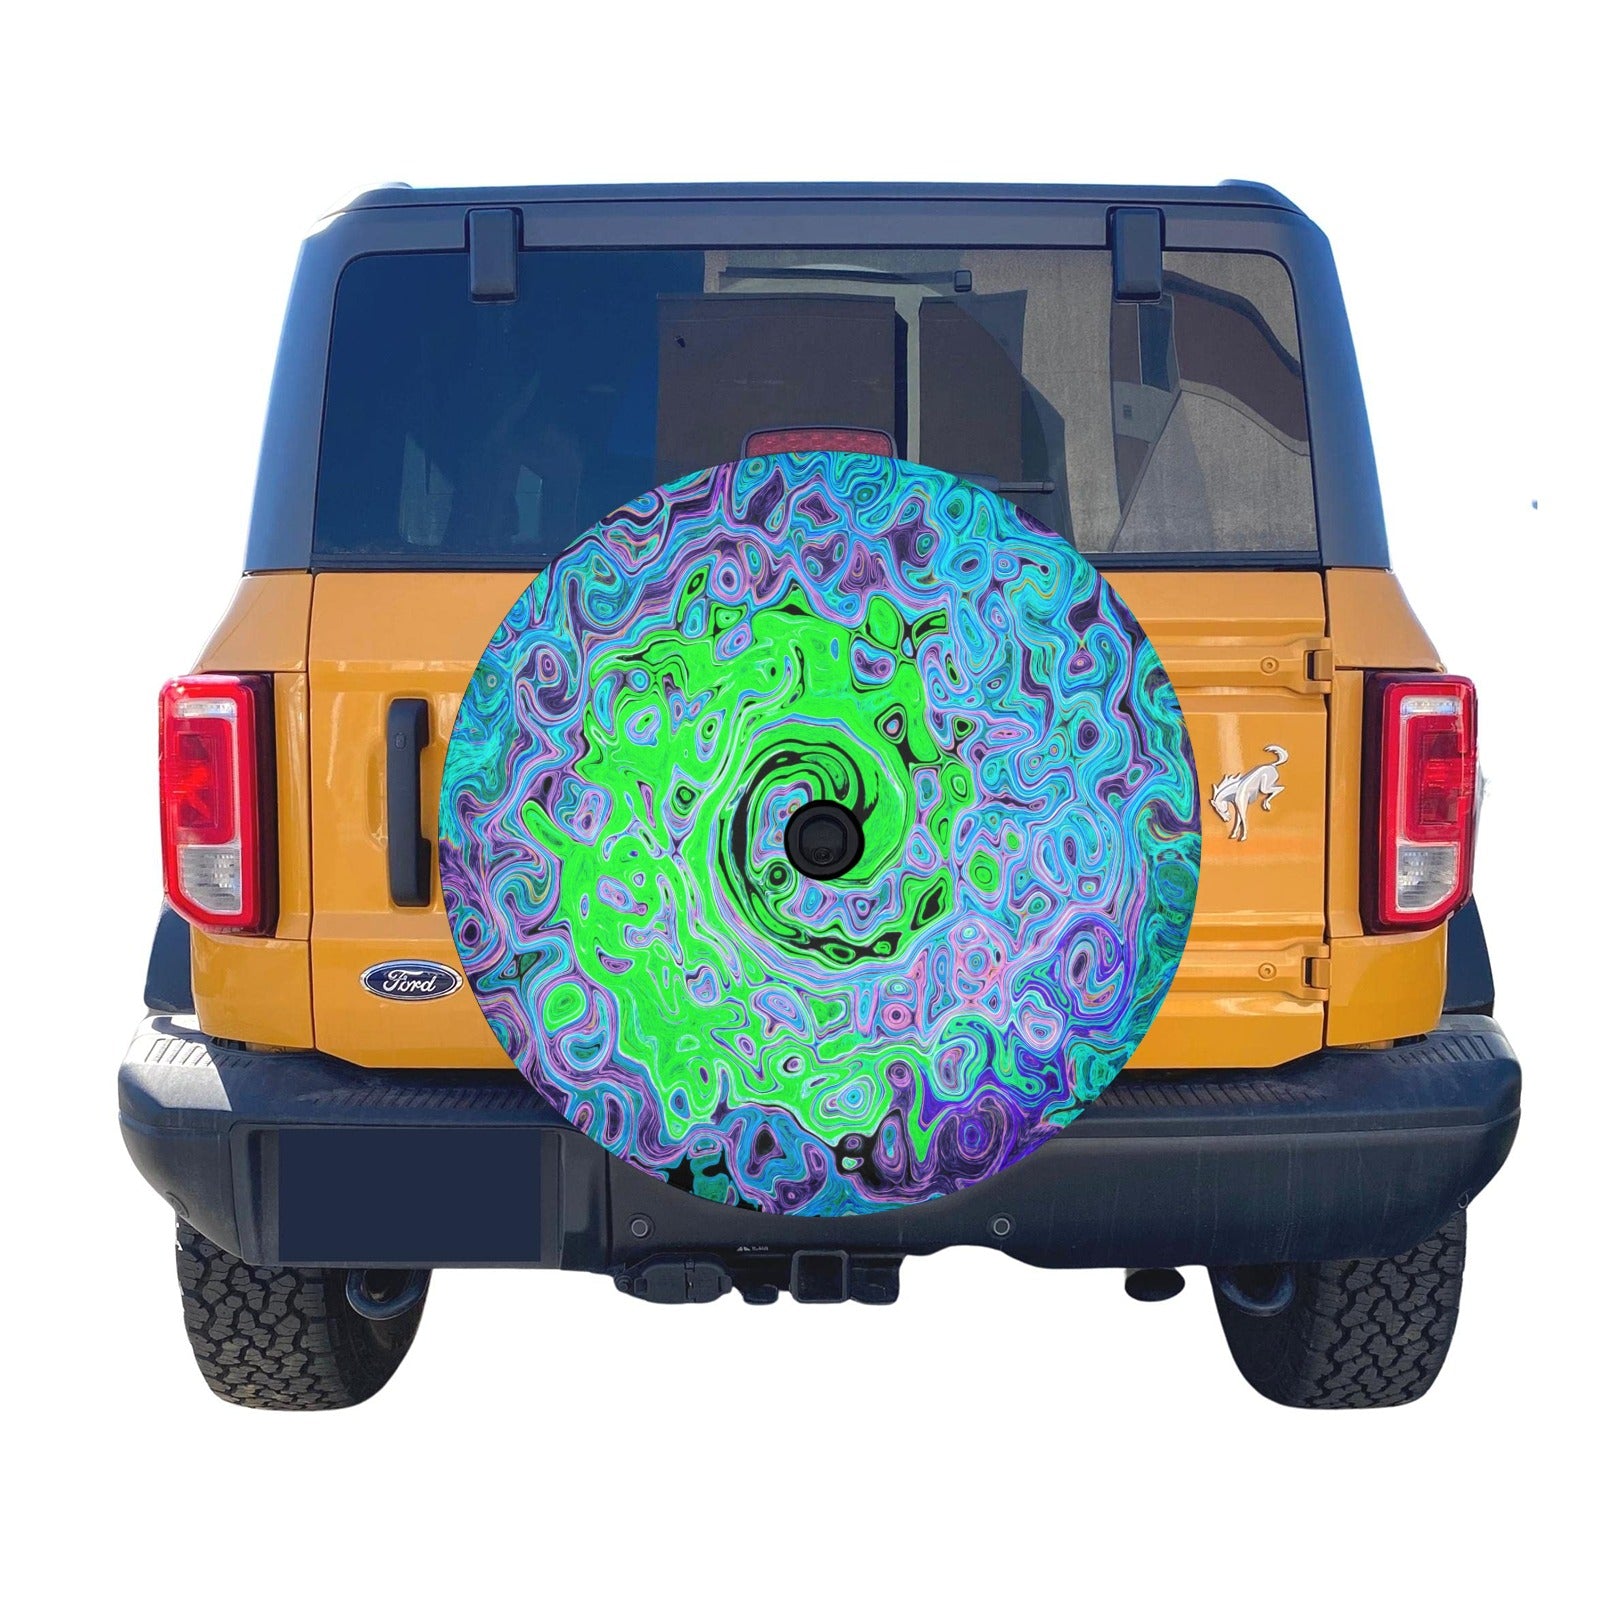 Spare Tire Cover with Backup Camera Hole - Lime Green Groovy Abstract Retro Liquid Swirl - Small